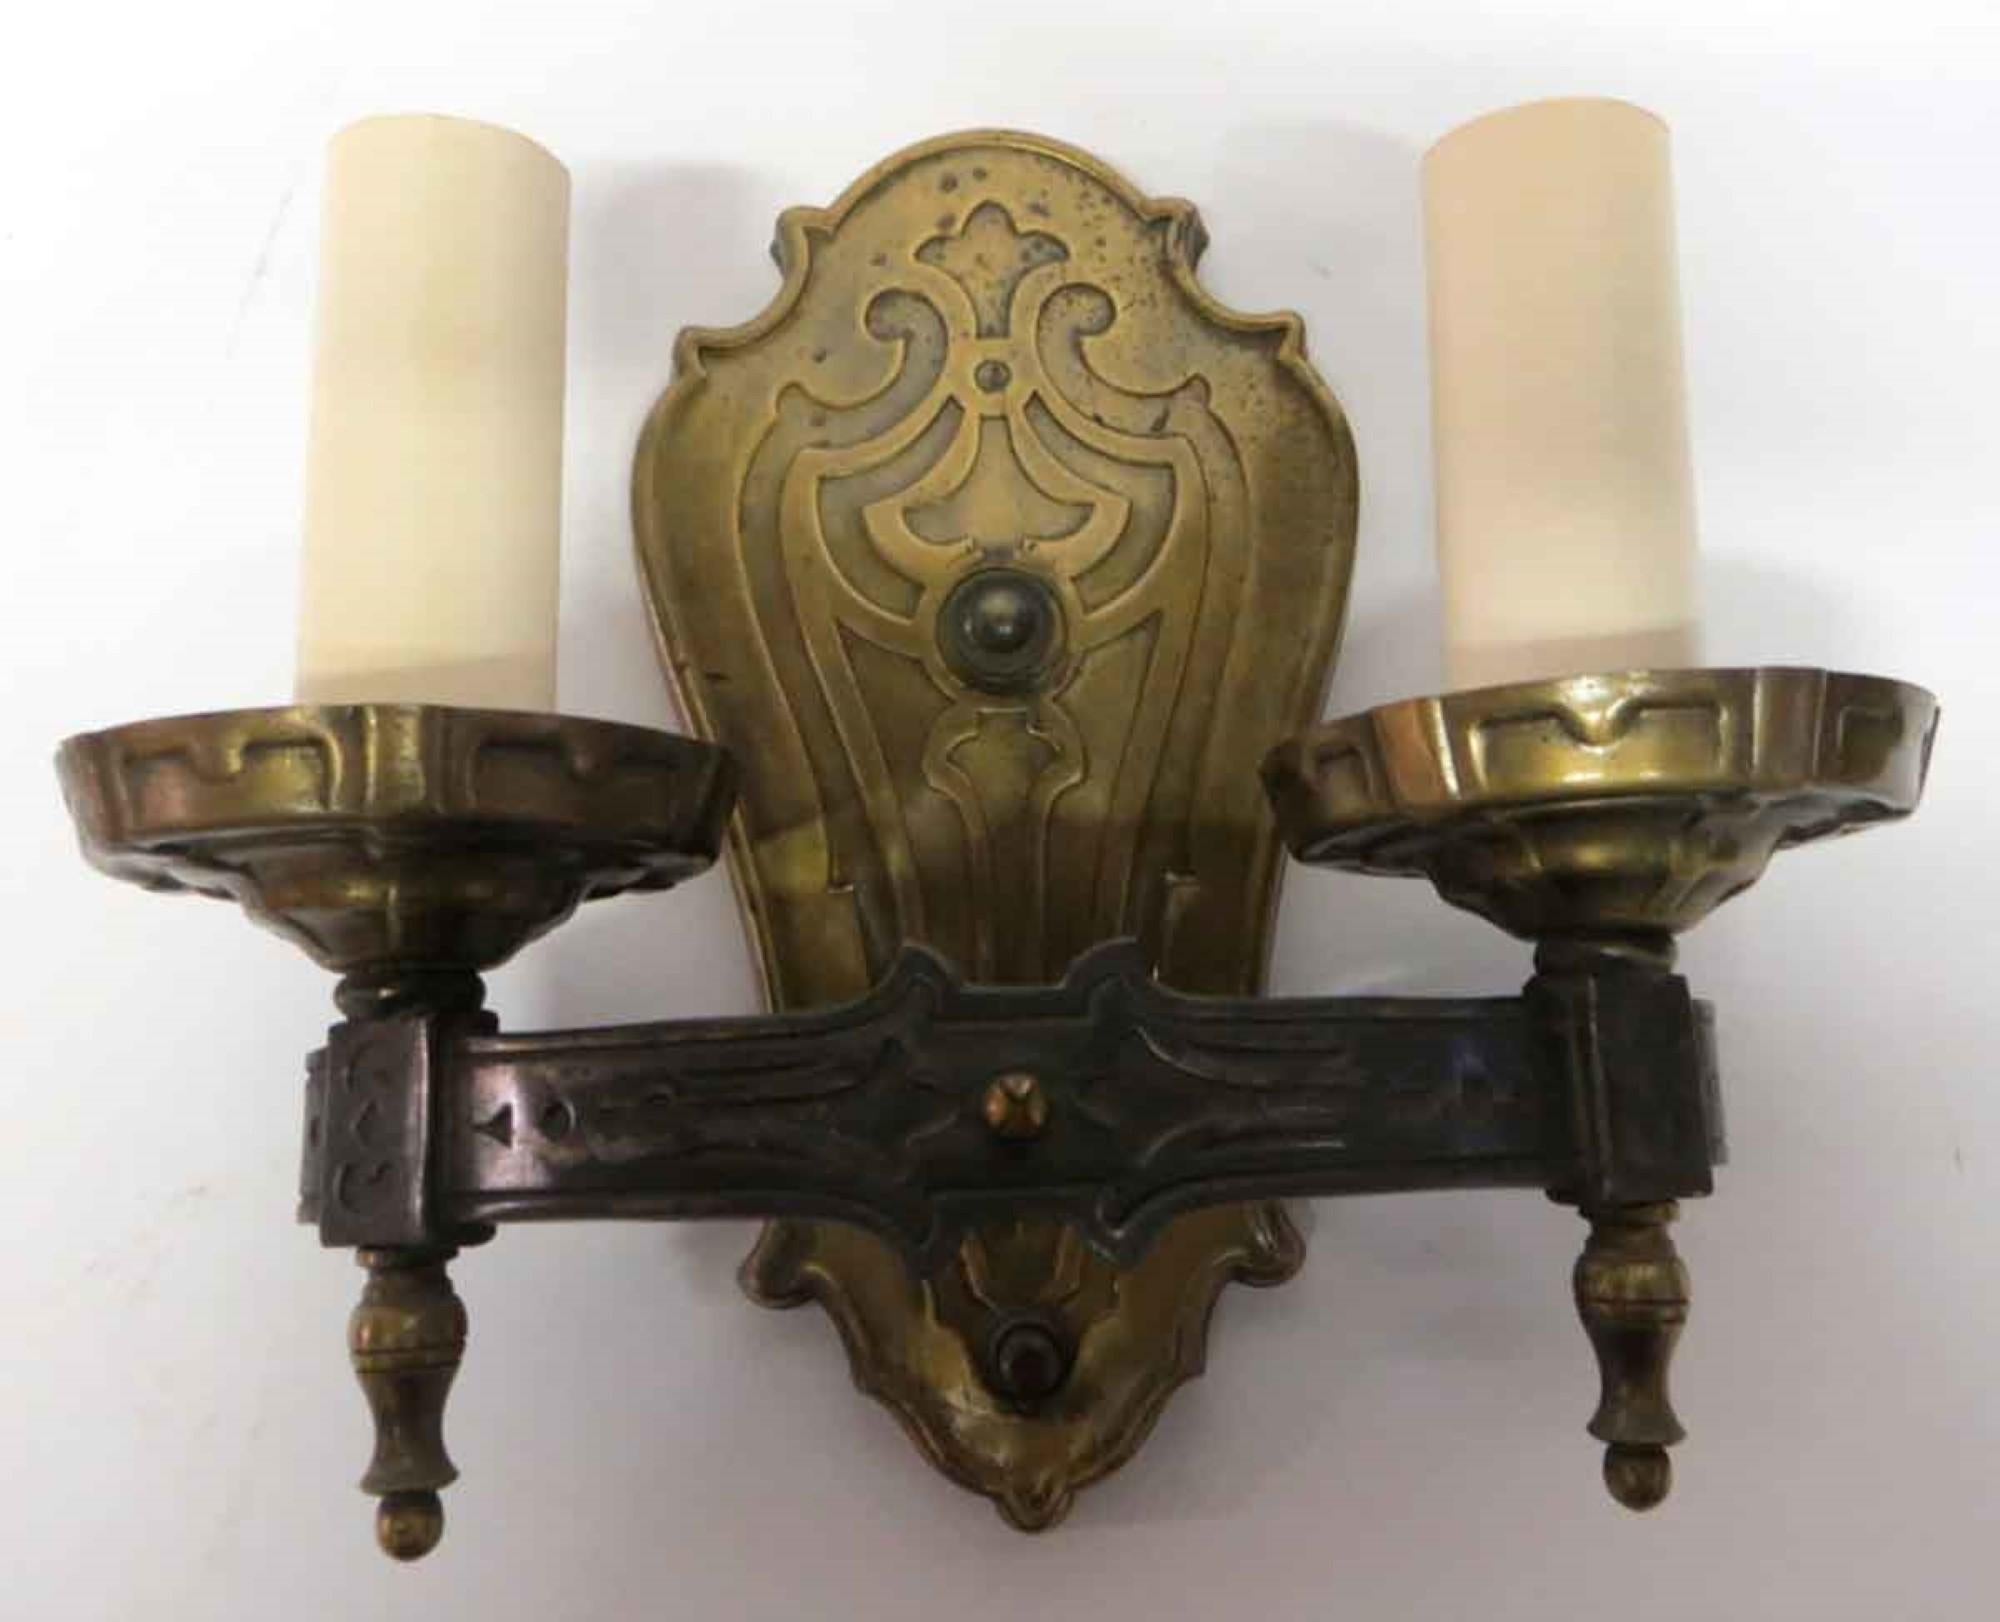 Pair of 1910s Art Nouveau brass wall sconces with two candlestick arms each. Priced as a pair. This can be seen at our 400 Gilligan St location in Scranton, PA.